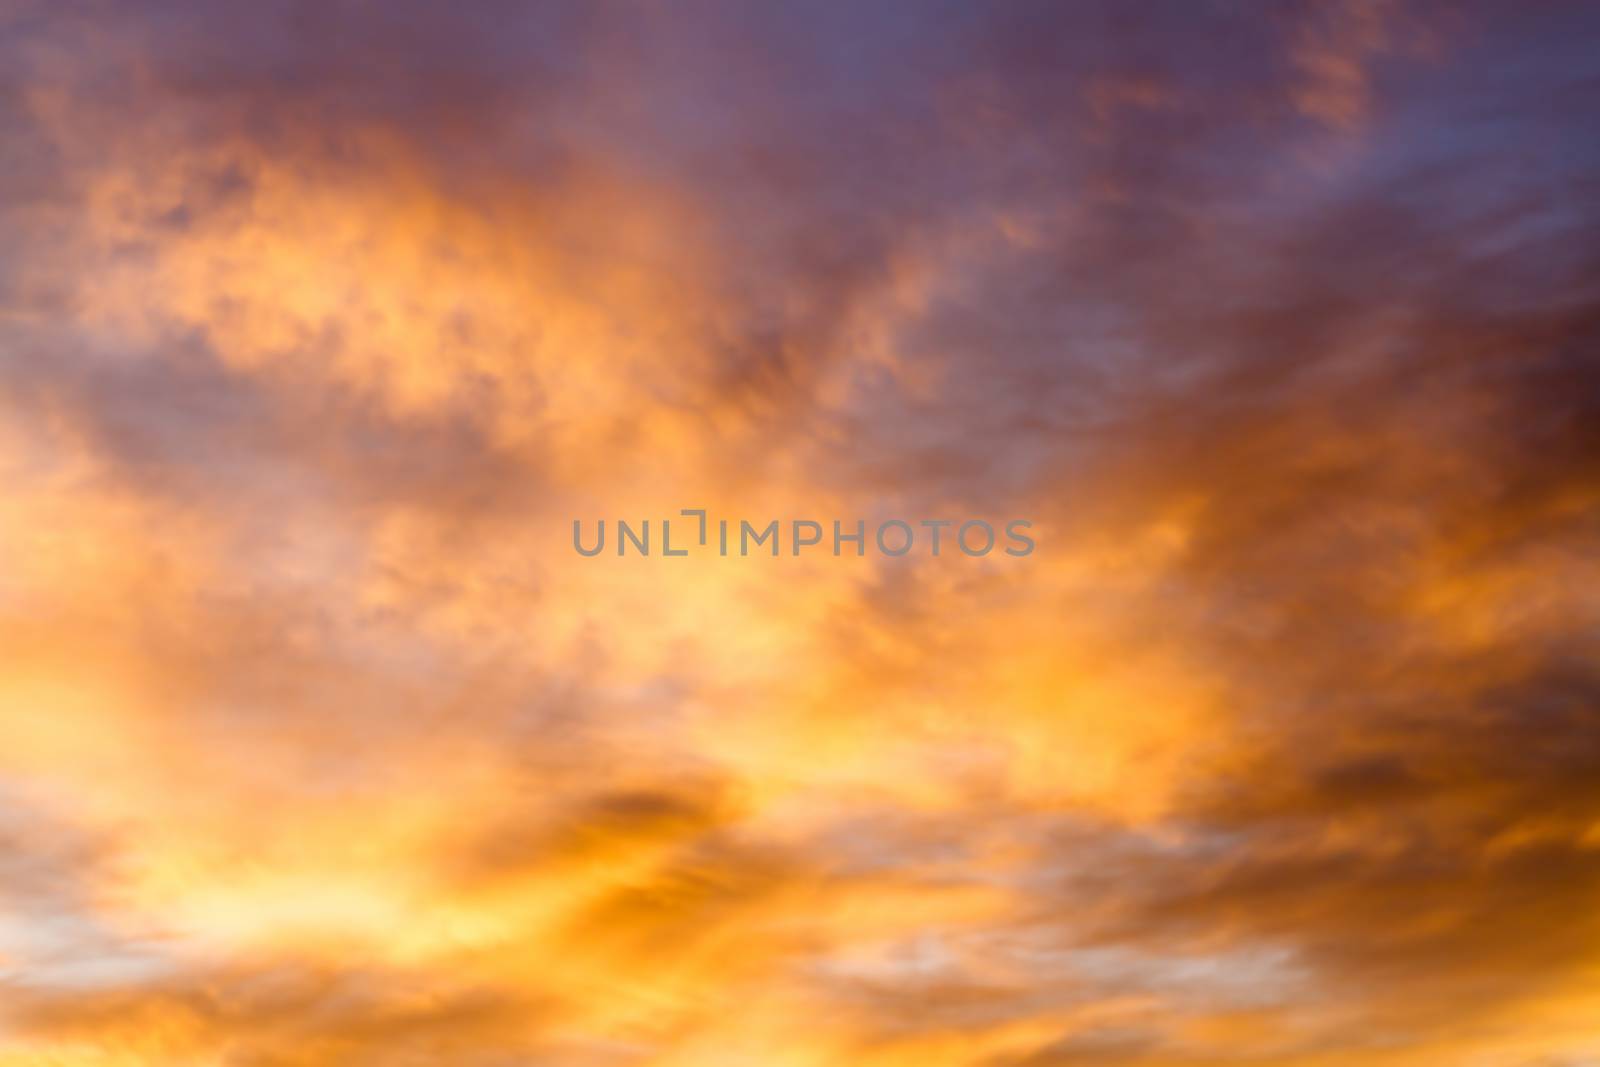 Dramatic sunrise sky with clouds.Blur or Defocus image. by ronnarong